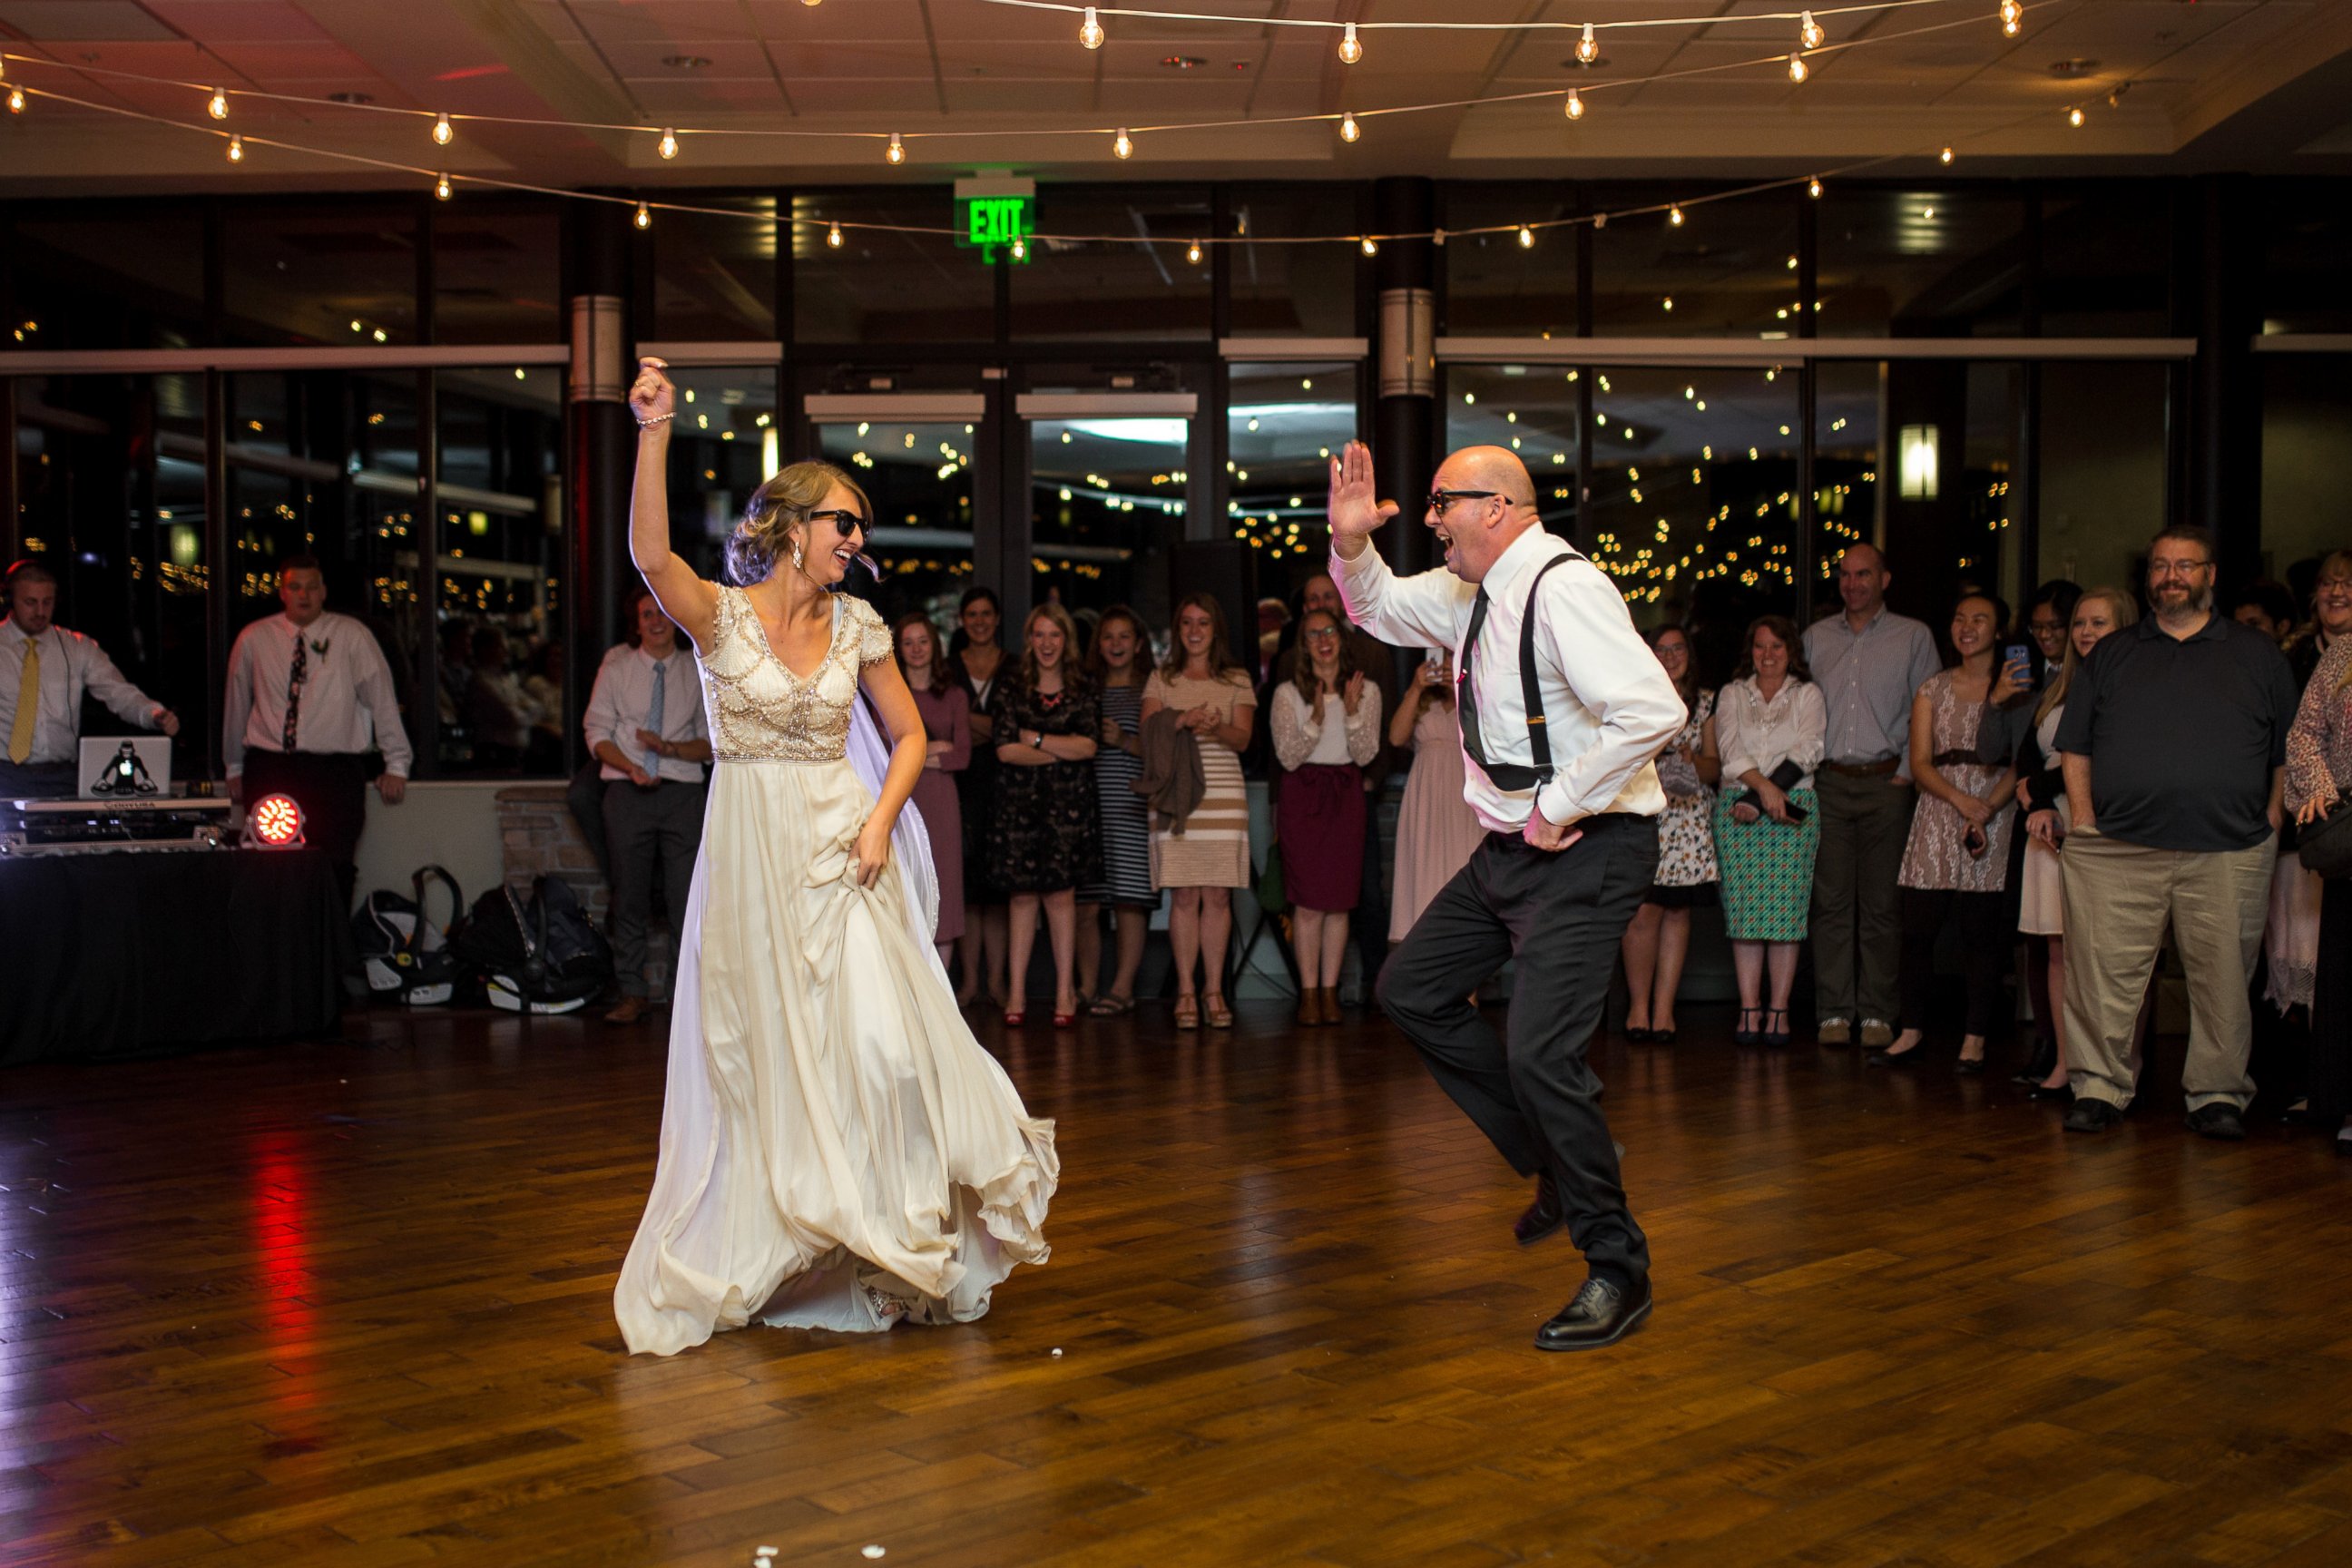 PHOTO: Mikayla Phillips and her dad, Nathan Ellison, performed a choreographed dance mash-up at Phillips' Oct. 8, 2016 wedding reception near Provo, Utah.